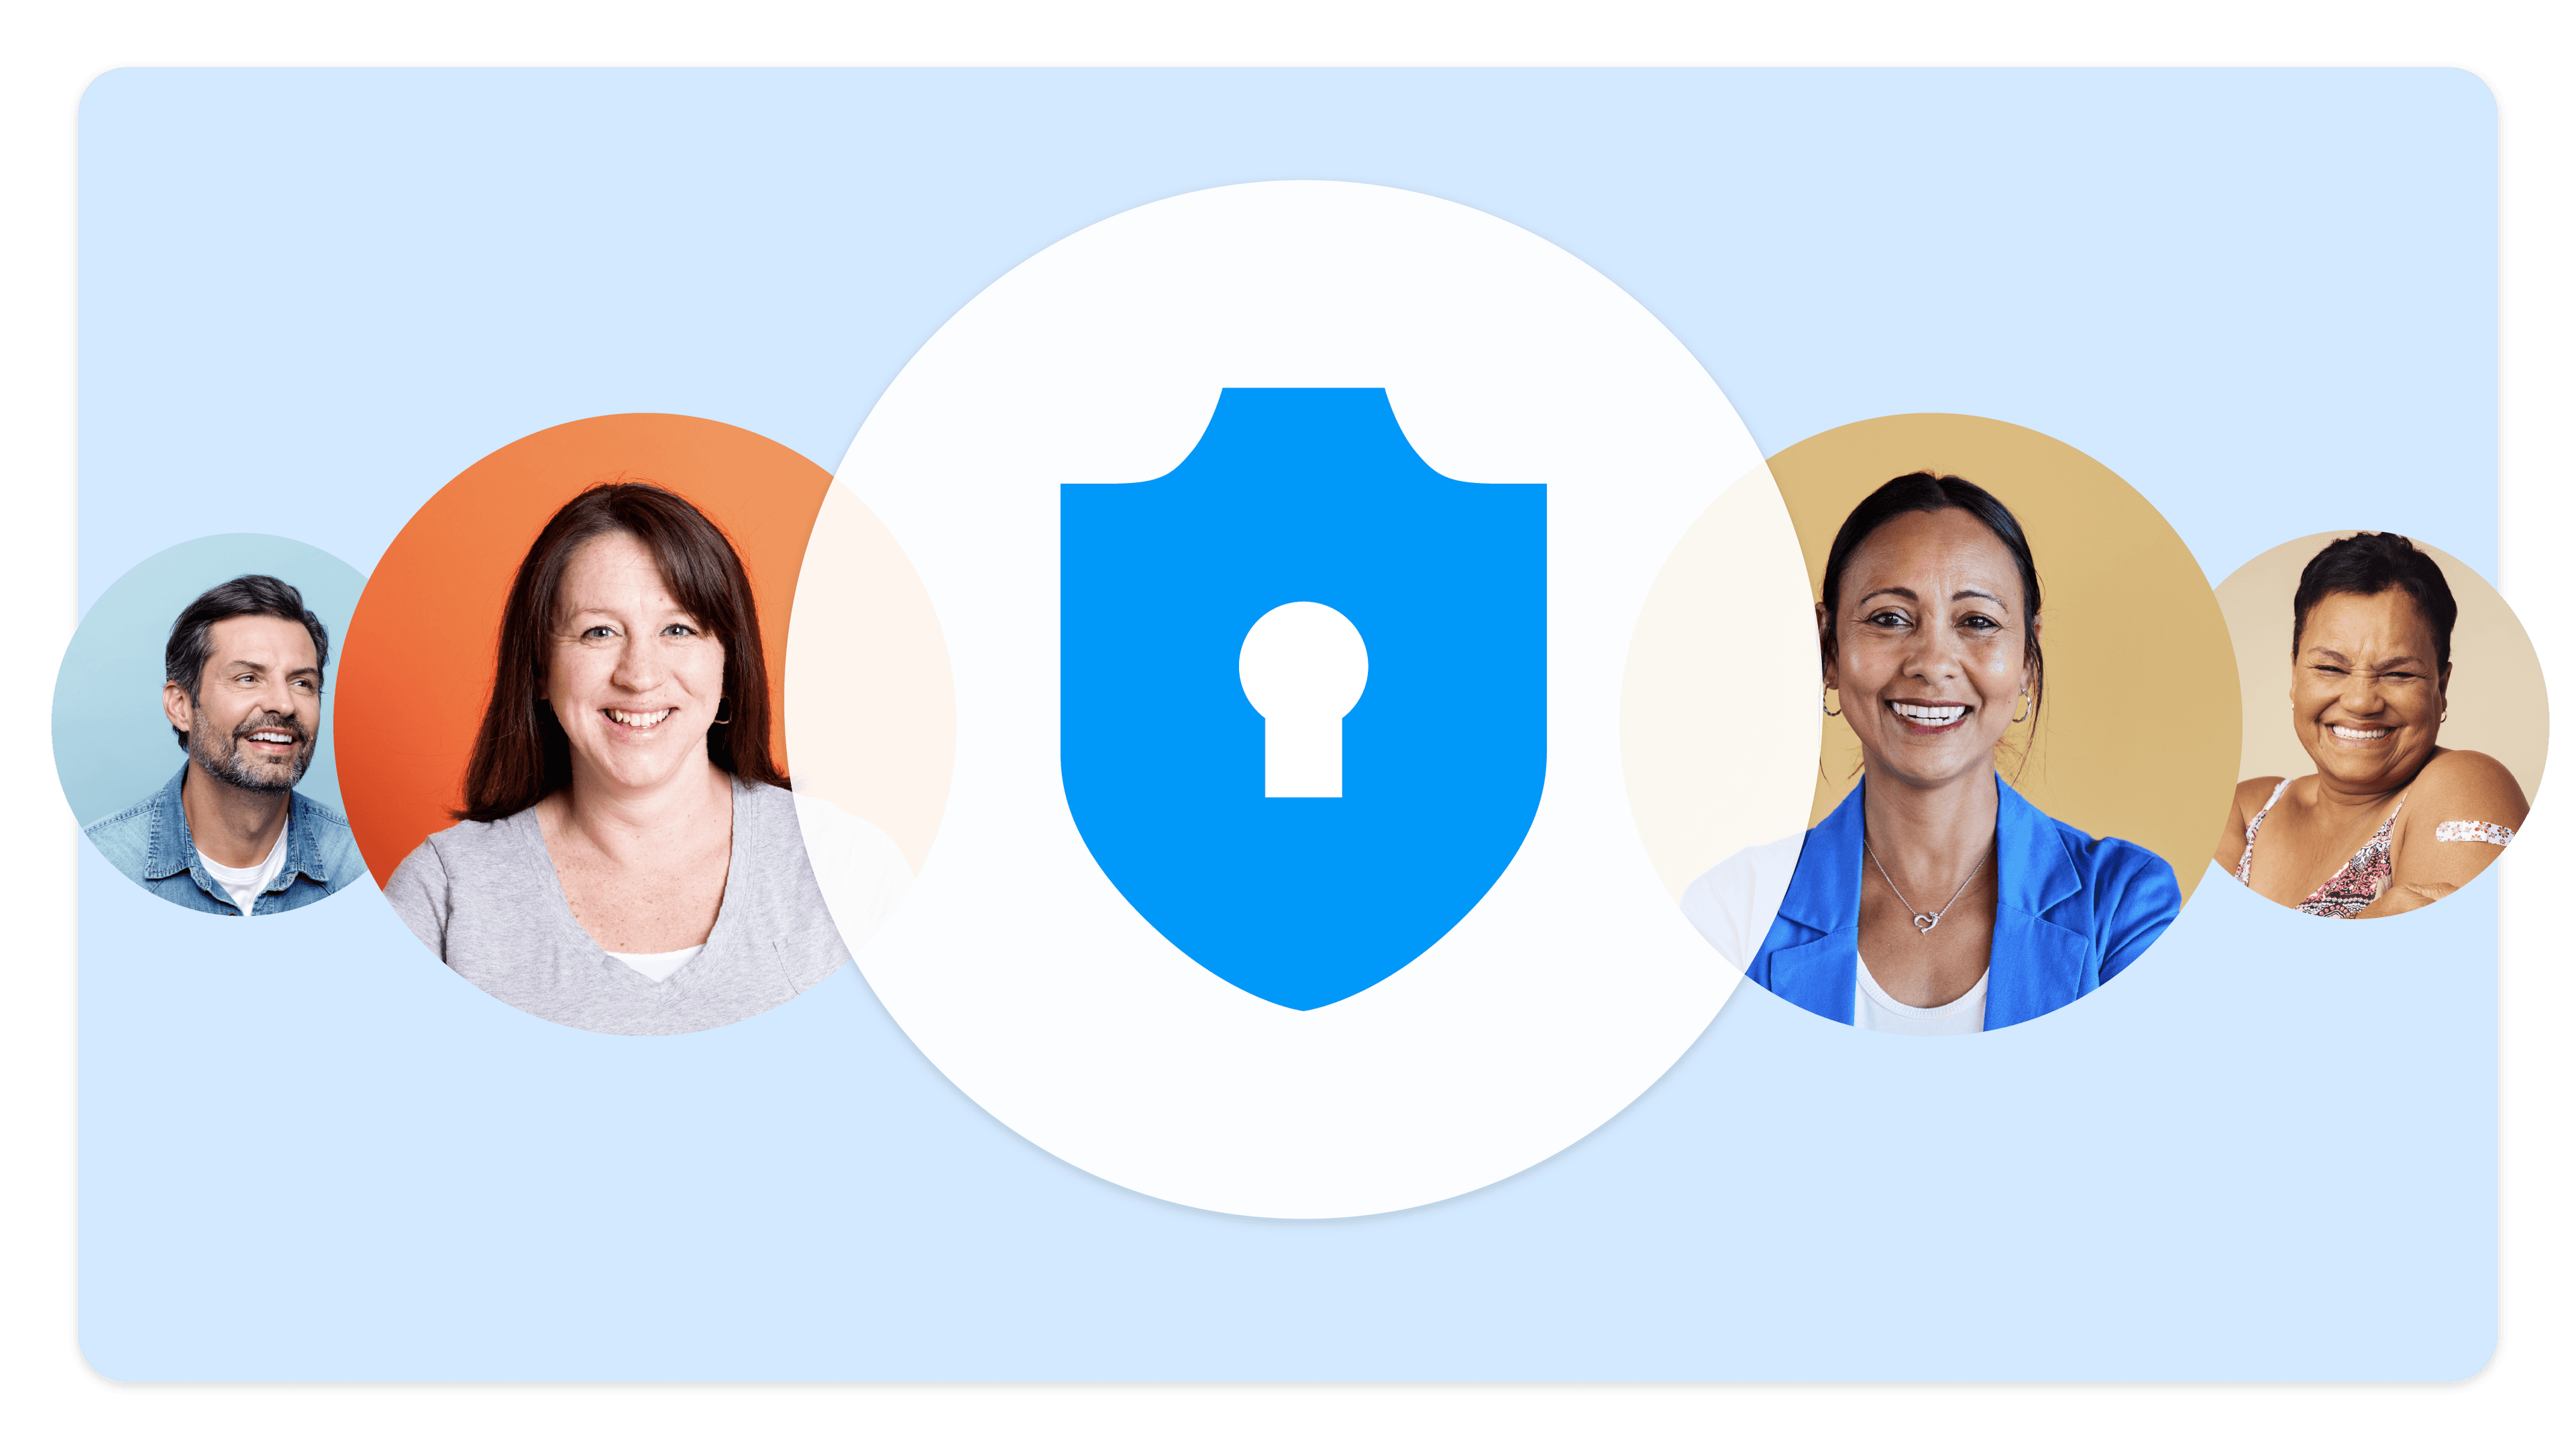 Blue background with four headshots and a graphic of a lock in the middle to represent "privacy conscious"